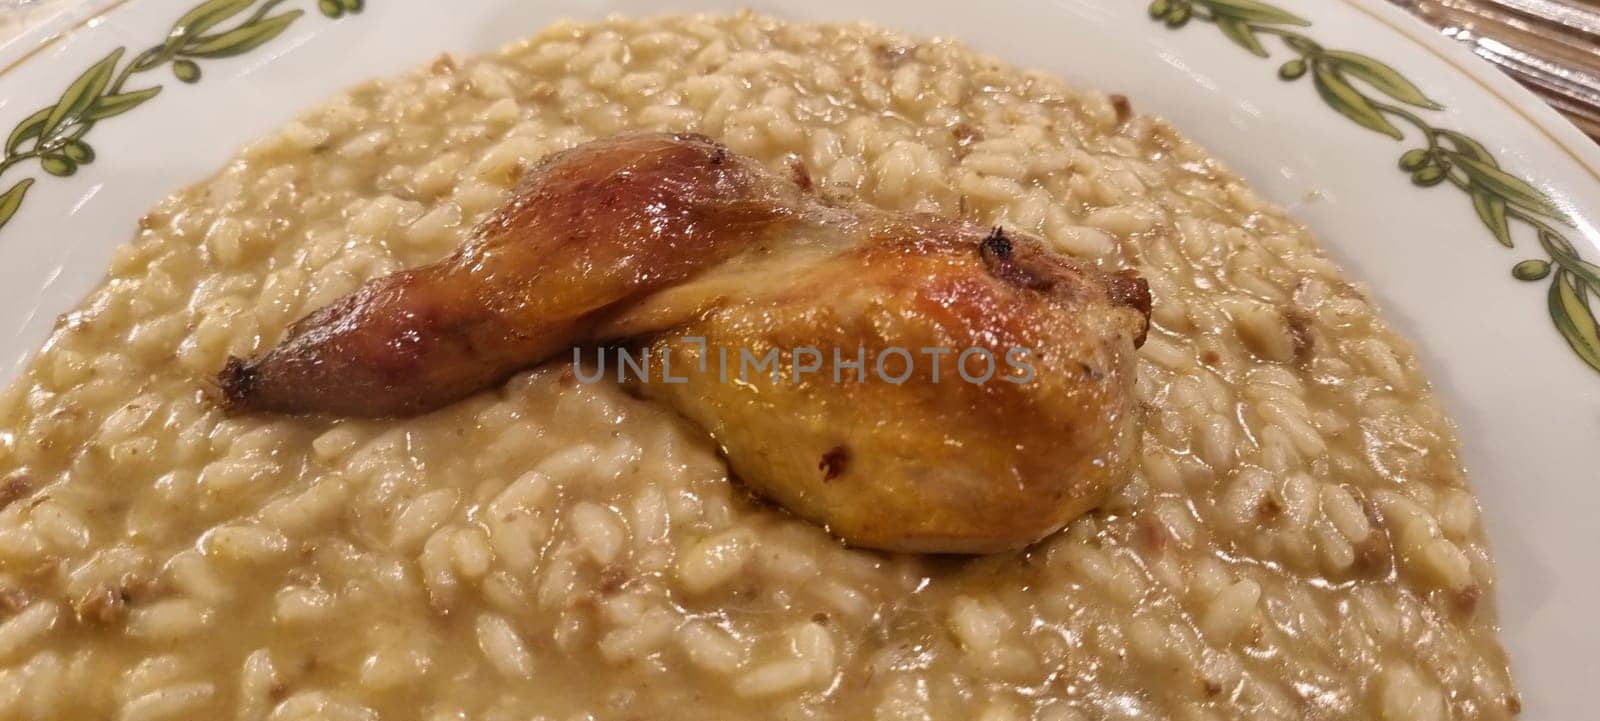 Close-up of creamy risotto with a succulent roasted chicken leg on a decorative plate